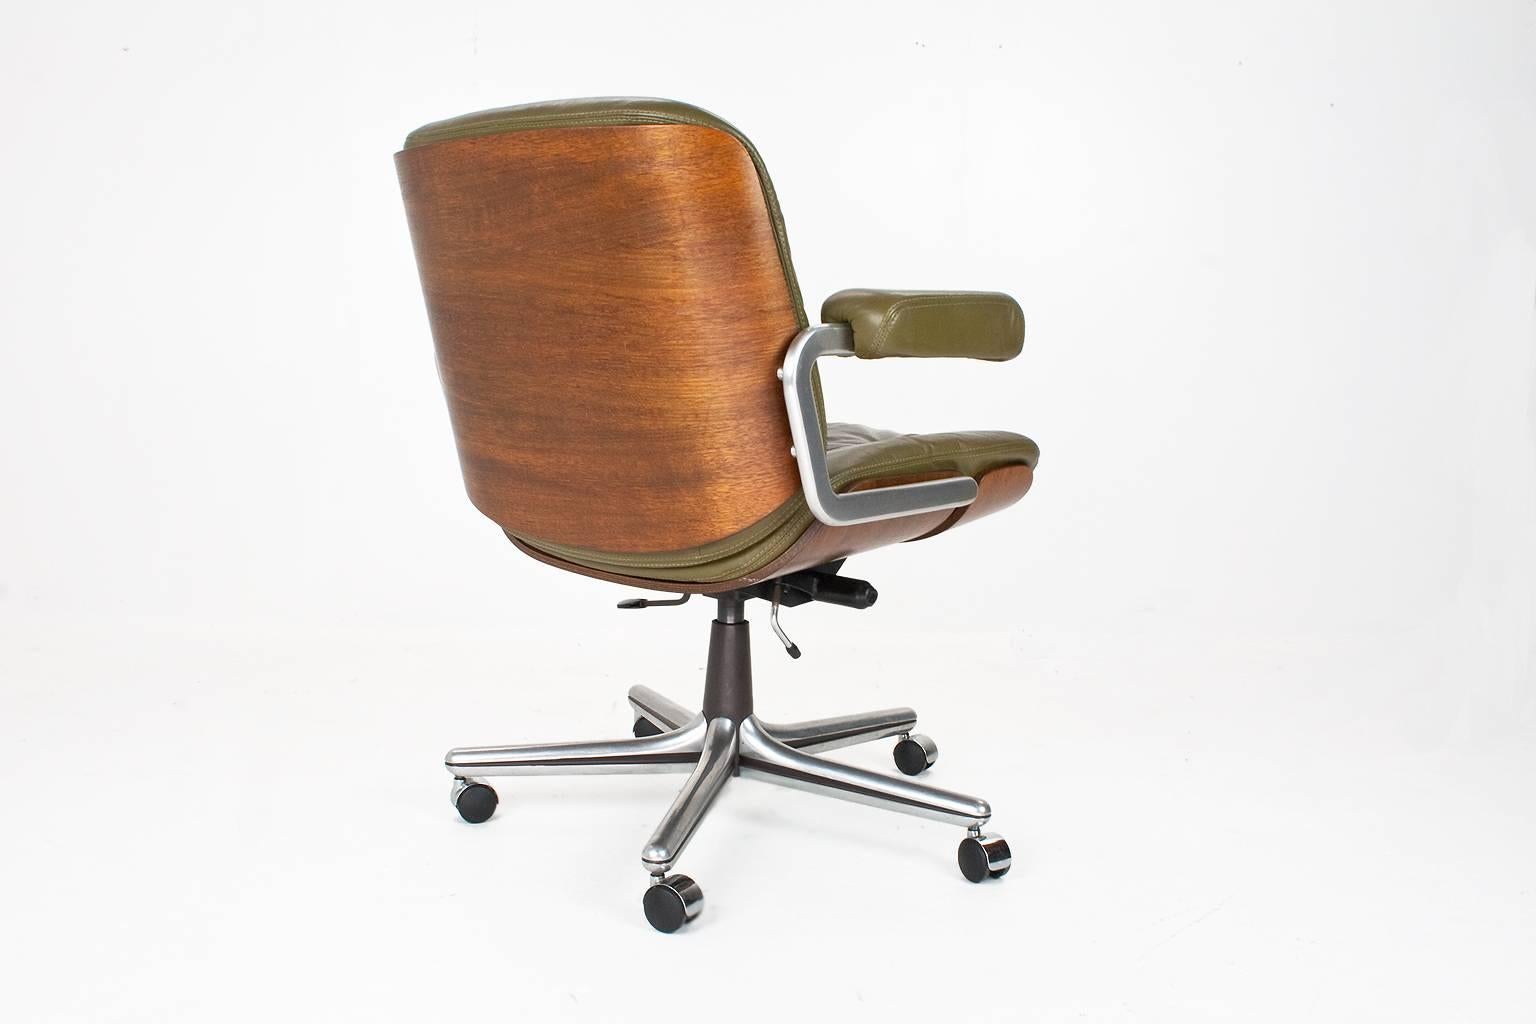 This rare vintage Swiss desk chair was designed by Martin Stoll in the 1960s and manufactured by Giroflex in Switzerland. The foot of this chair is made from polished aluminium with a rosewood veneer bent plywood shell as backrest and good quality